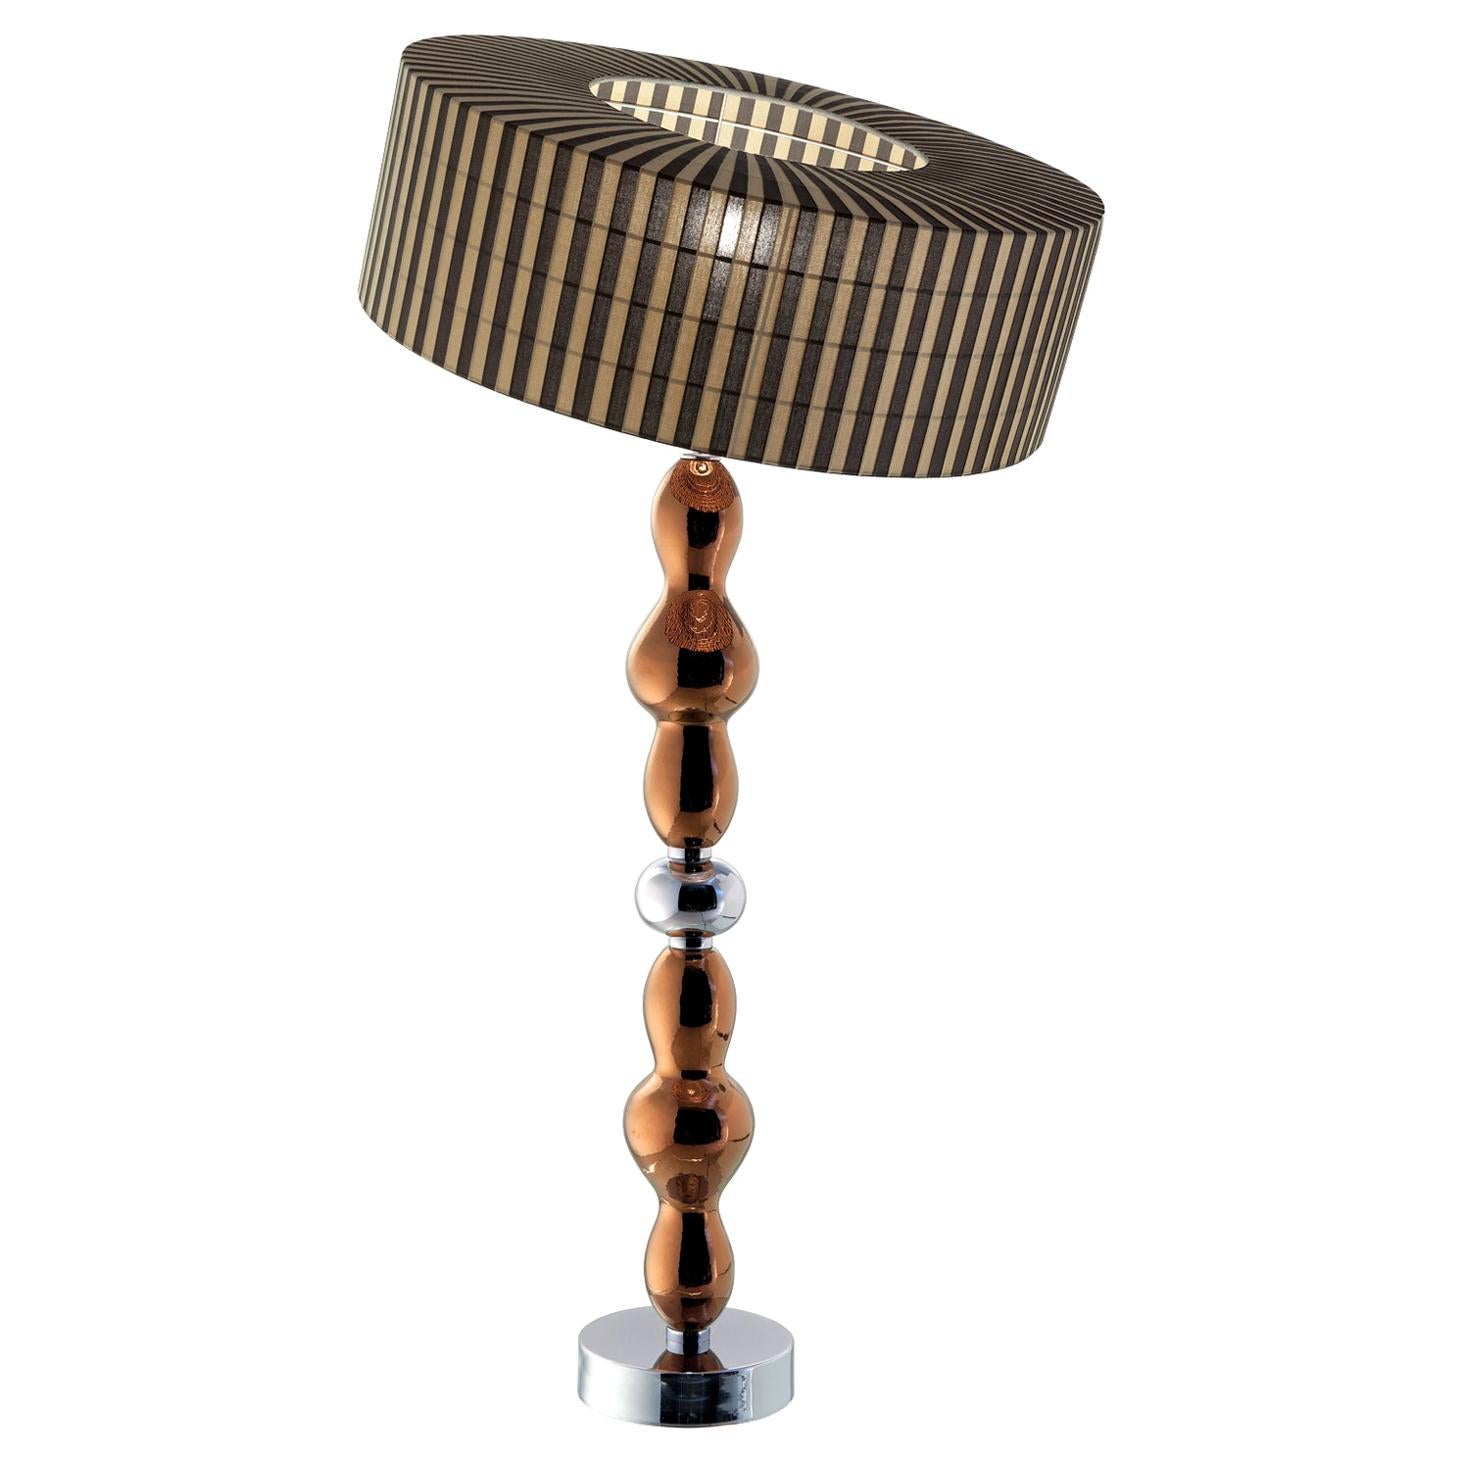 21st Century Ginger and Fred Copper Ceramic Table Lamp by Patrizia Garganti For Sale